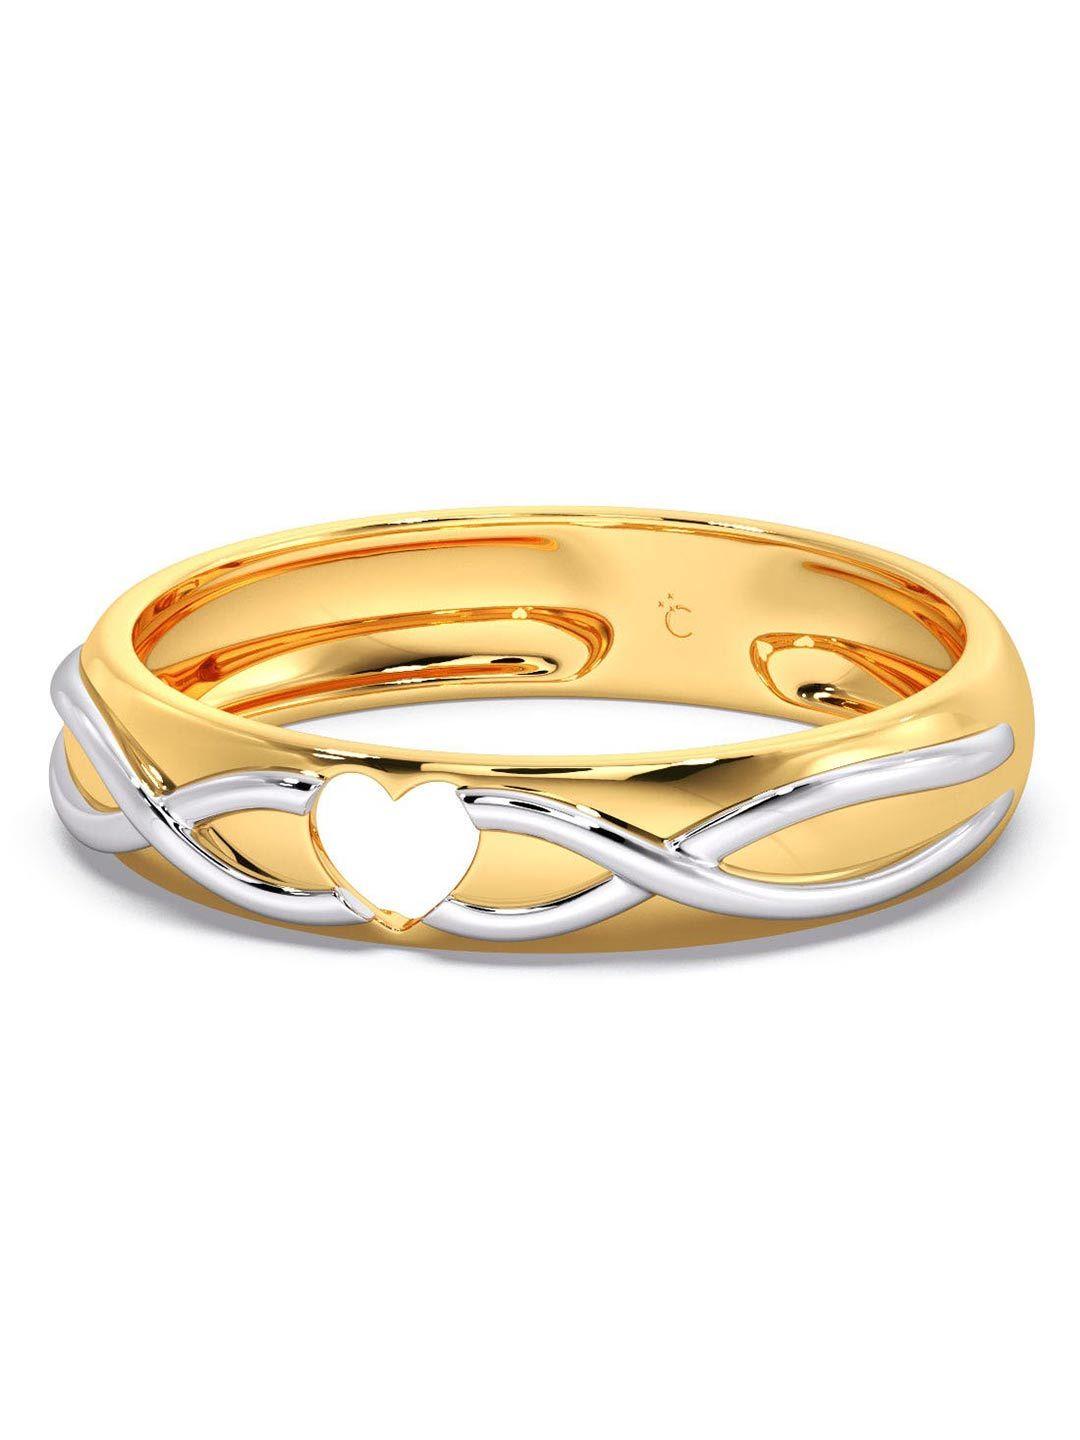 candere a kalyan jewellers company 14kt gold finger ring-2.51gm